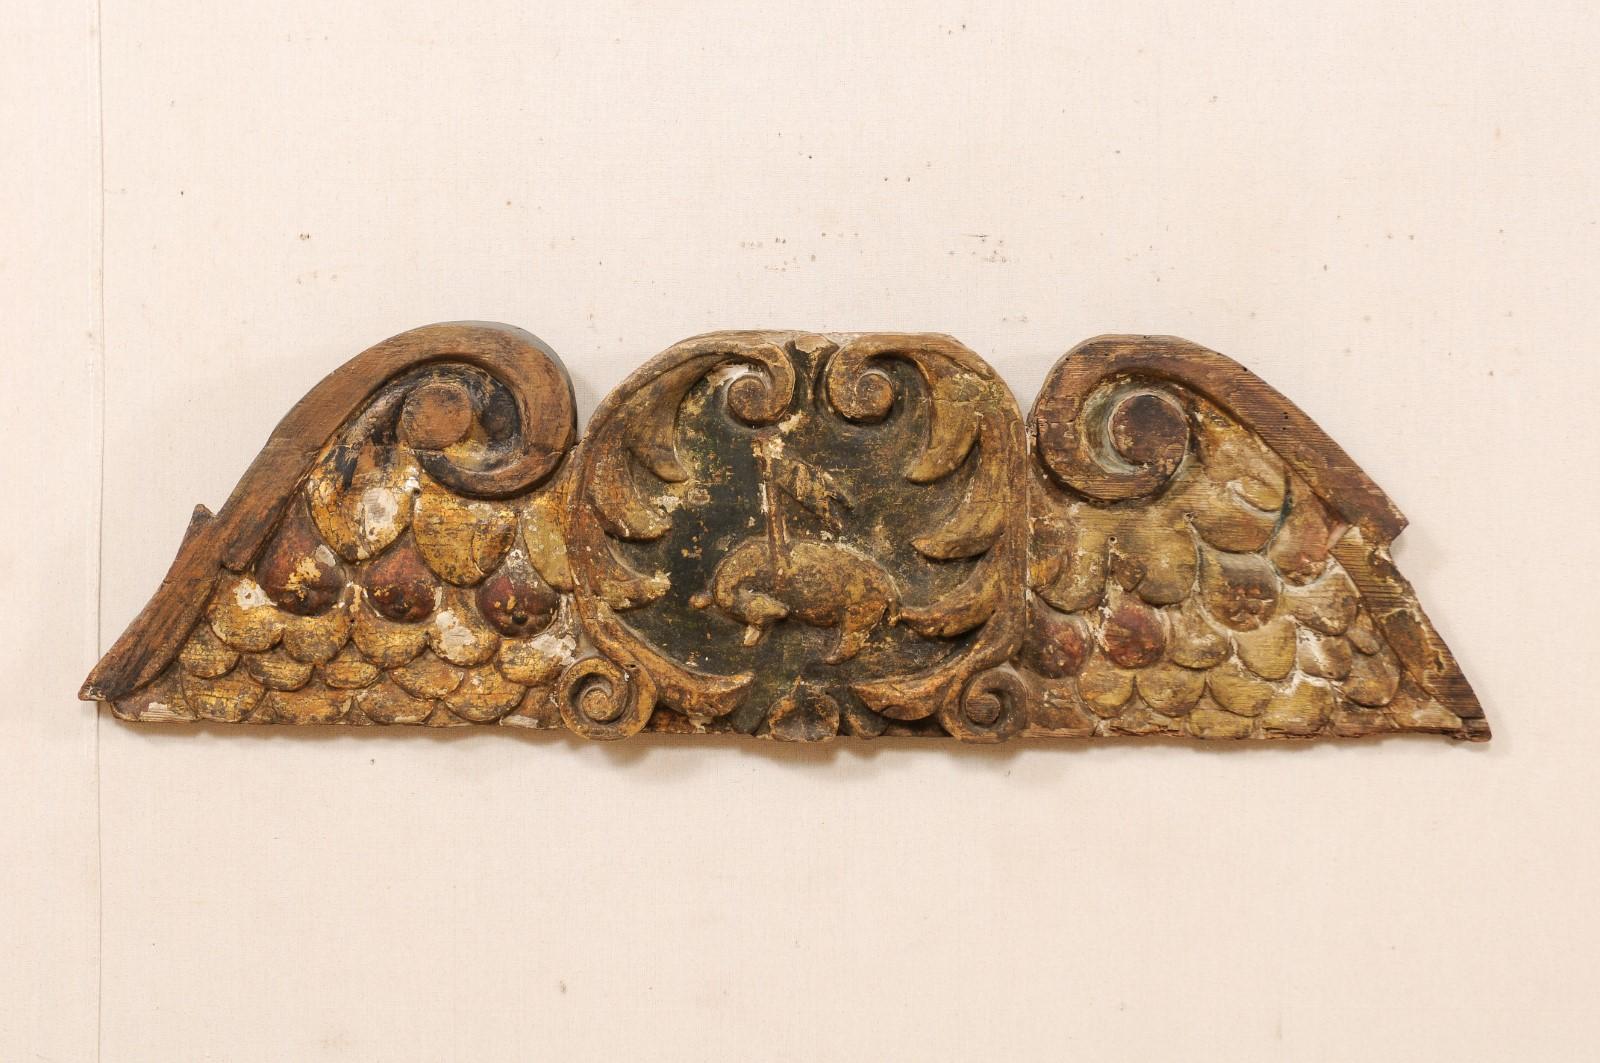 A Spanish carved wood fragment from the late 18th-early 19th century. This antique wall decoration from Spain has been hand-carved to resemble an outwardly displayed wing span, framed with volutes and feather details. There is an animal carved at